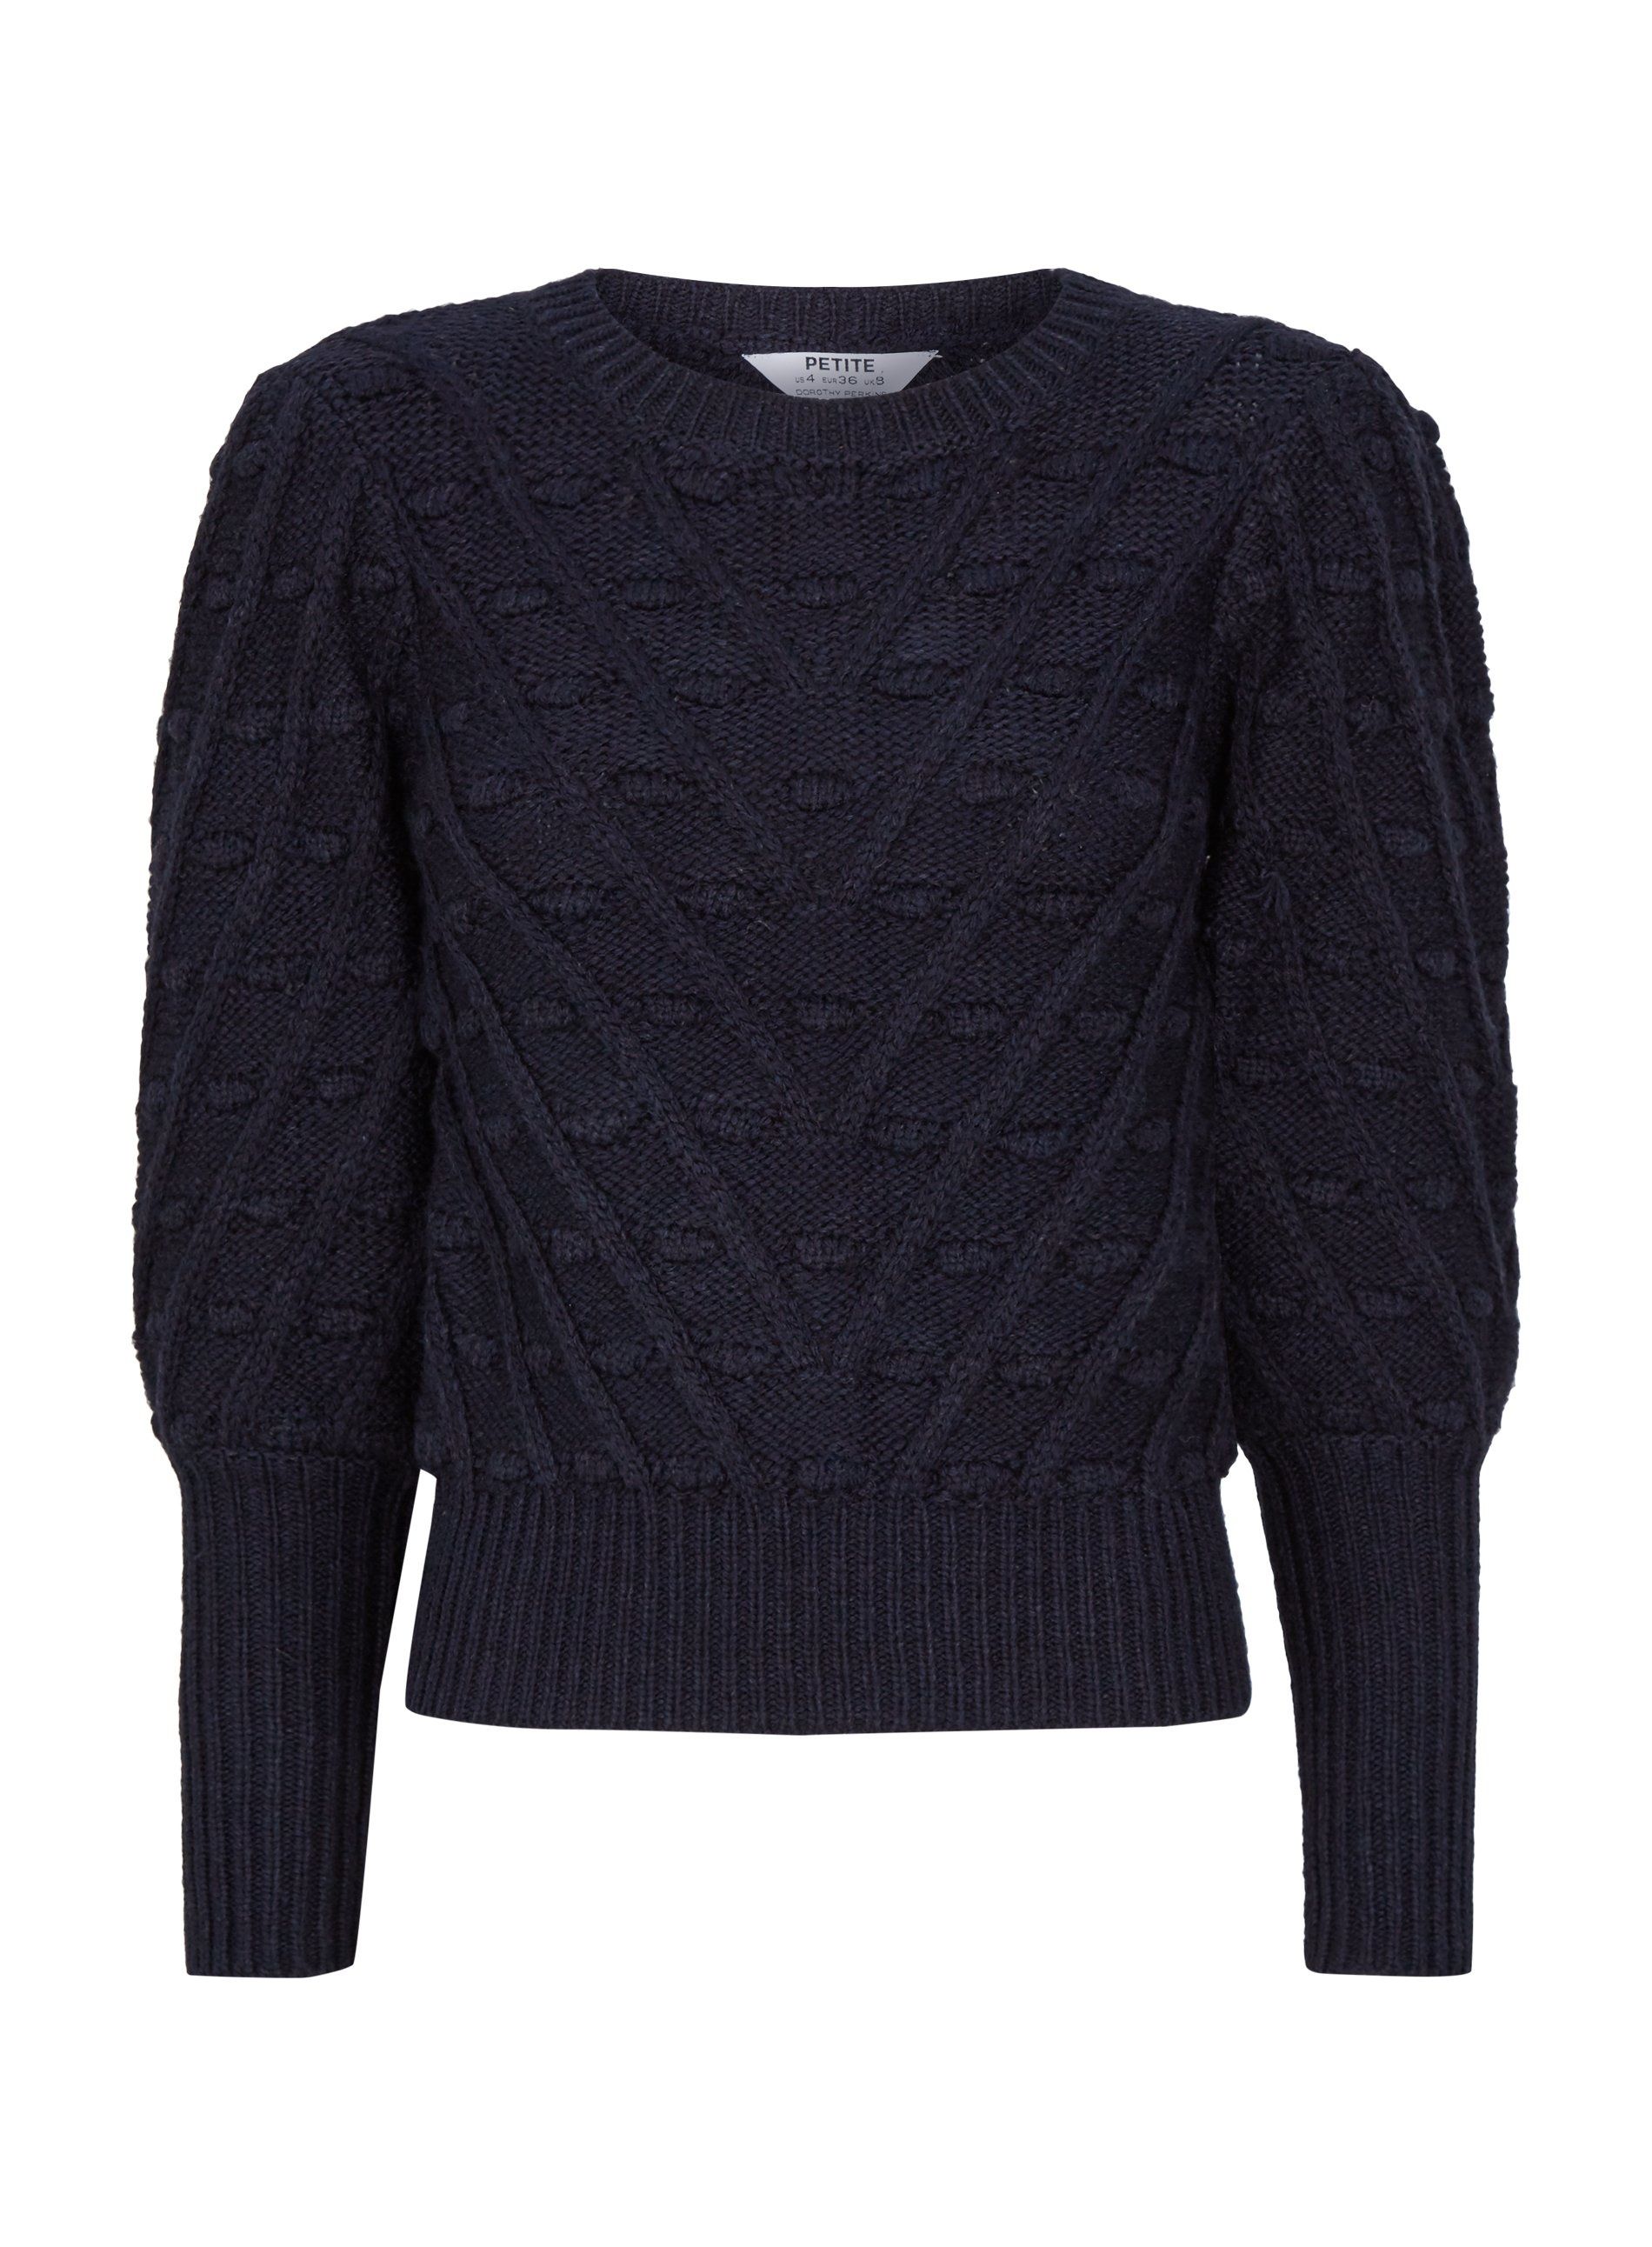 Dorothy Perkins Womens Petite Navy Bobble Jumper Sweater Pullover Top ...